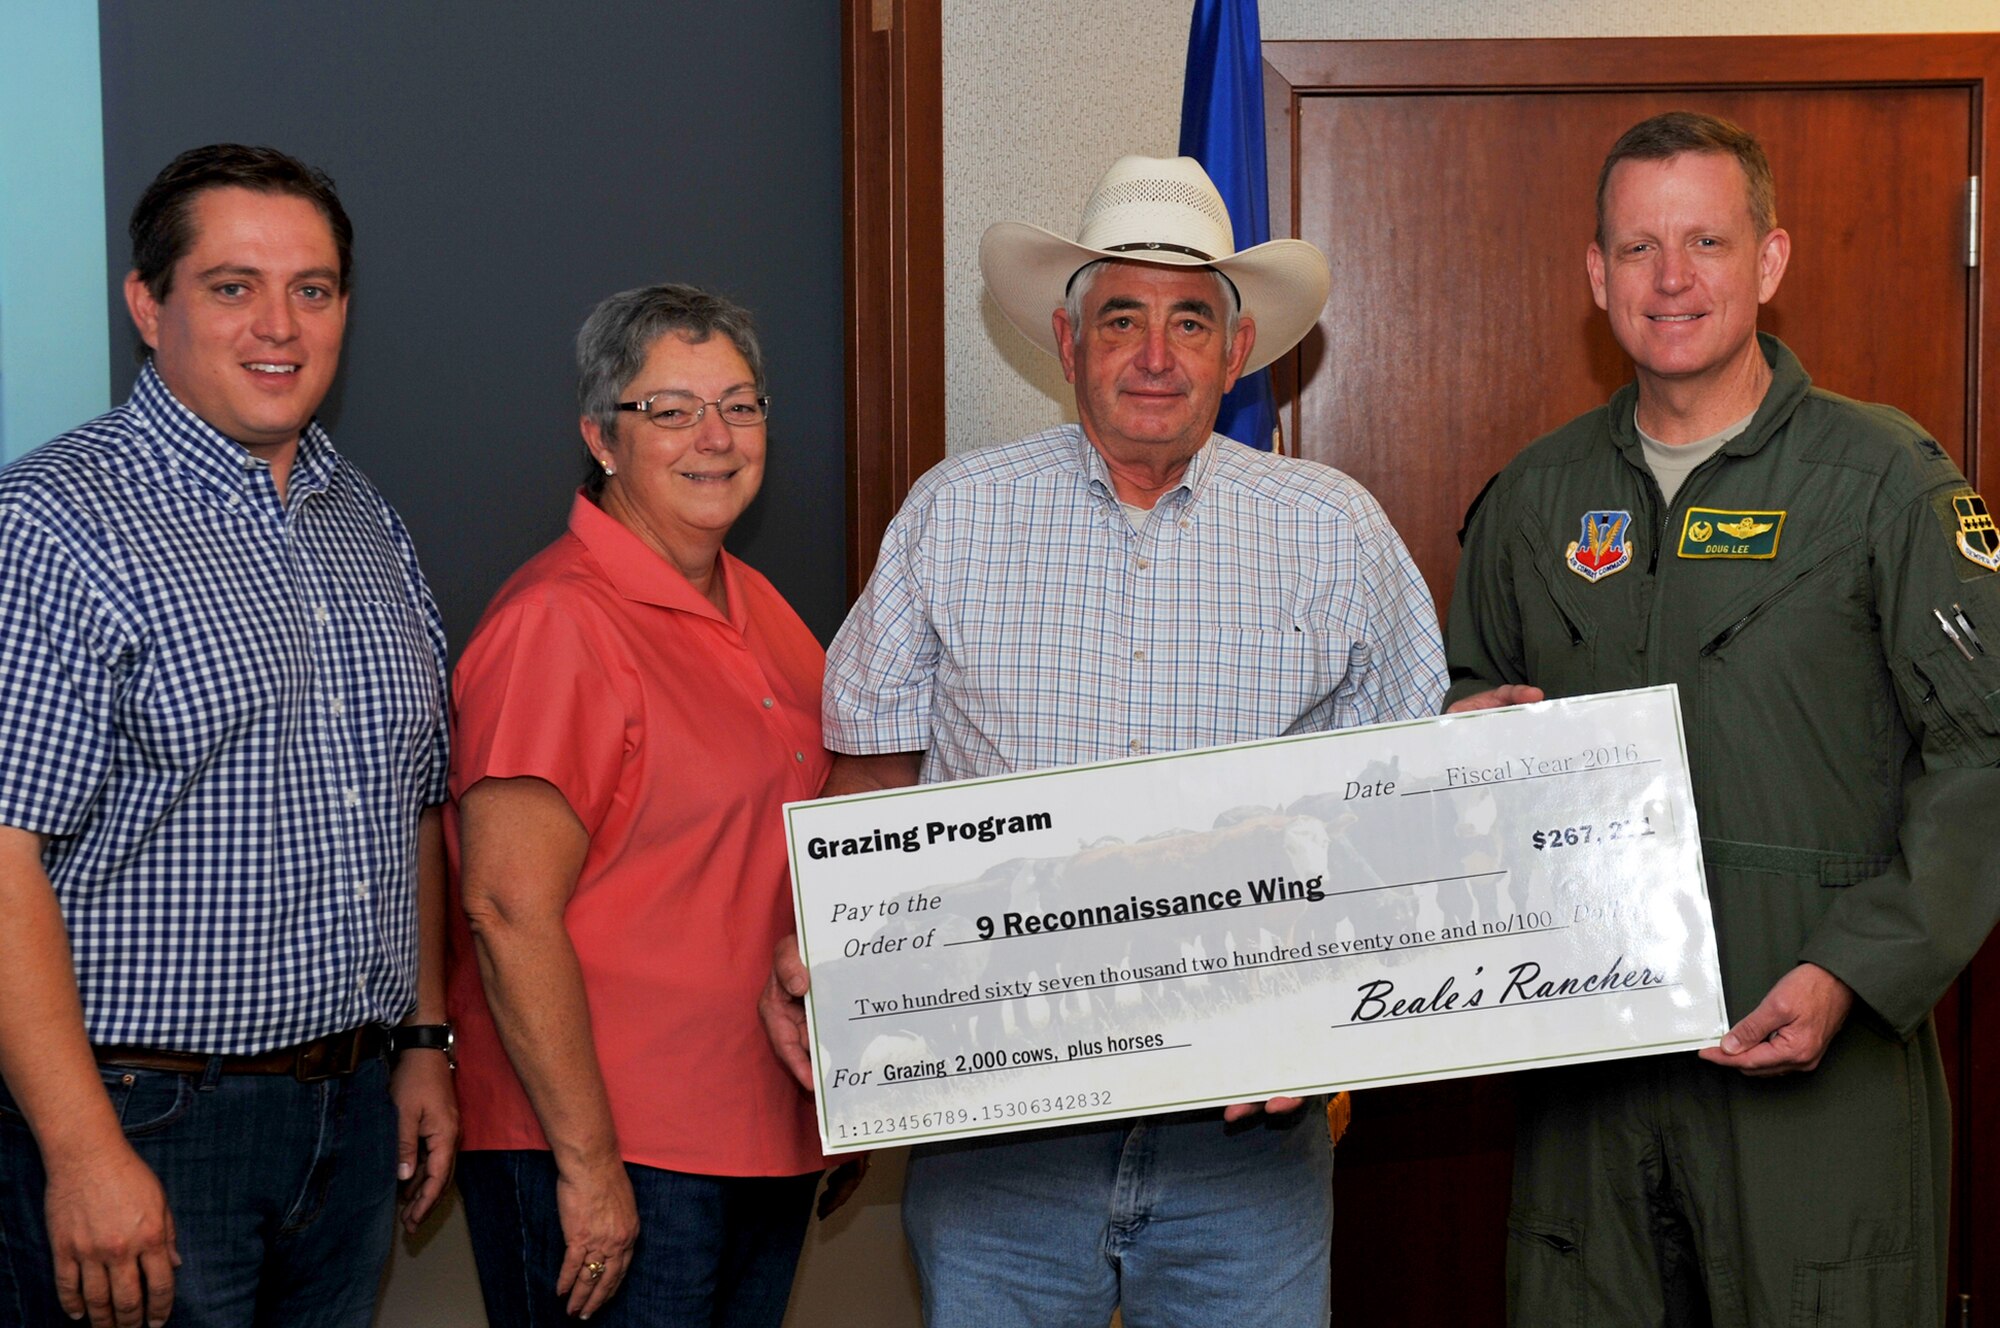 Members of The Schohr Ranch present a check for cattle grazing funds to Col. Douglas Lee, 9th Reconnaissance Wing commander (right) on Beale Air Force Base, California, June 28, 2016. The $267,271 check represents a partnership
between the ranchers and Beale that facilitates the grazing of more than two thousand cattle on the installation. The partnership is the 2nd largest grazing project in the U.S. Air Force and provides both economic stimulus as well as cutting installation maintenance costs. (U.S. Air Force photo by Staff Sgt. Jeffrey Schultze)
